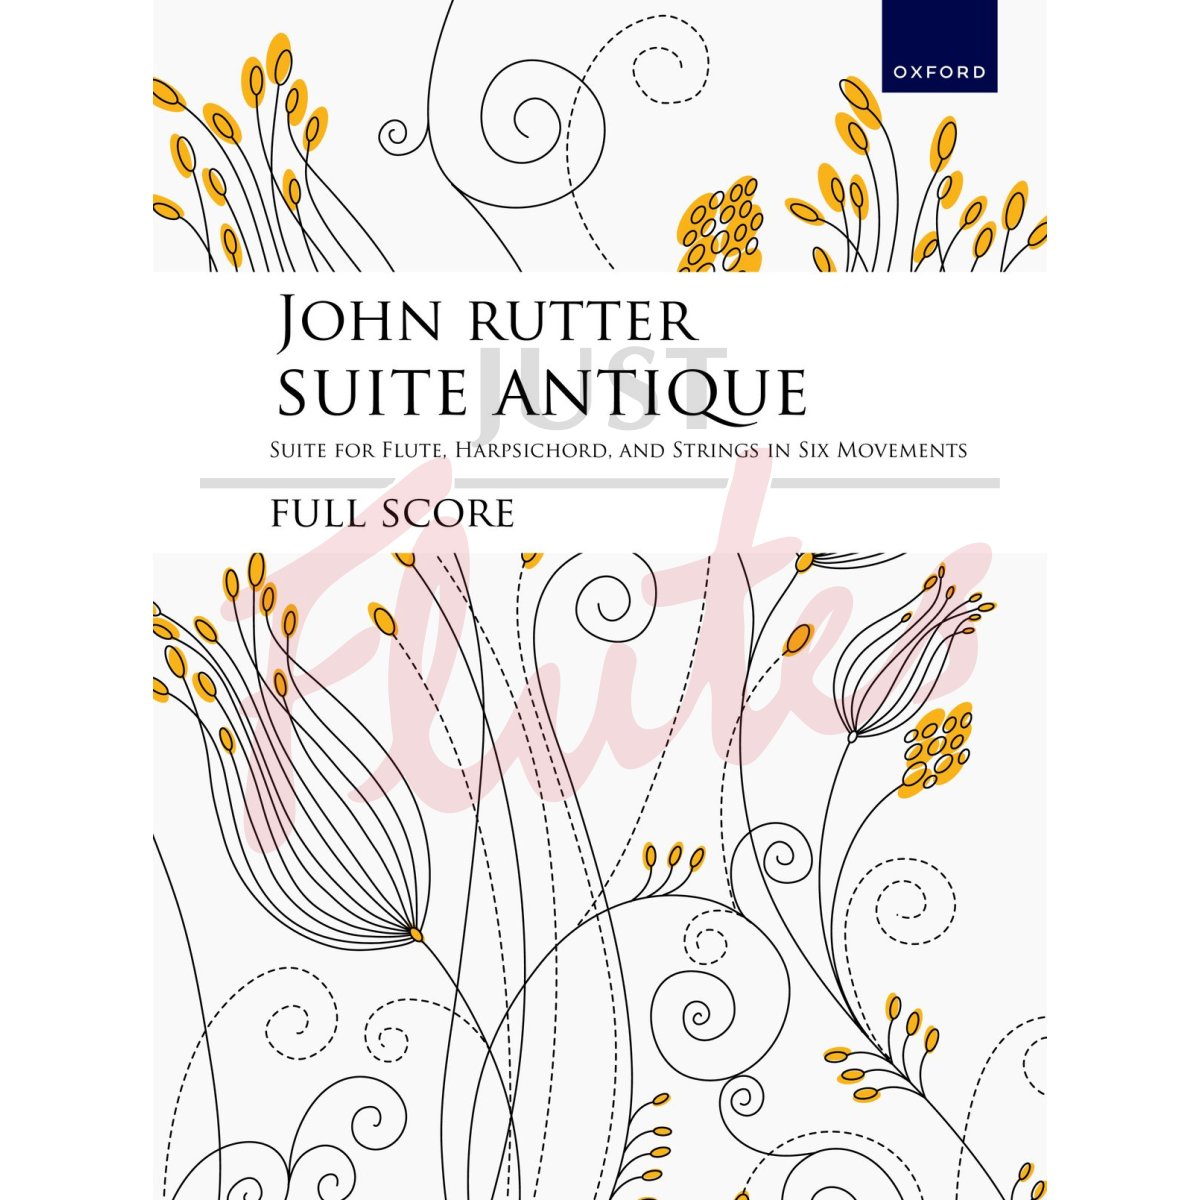 Suite Antique for Flute, Harpsichord and Strings